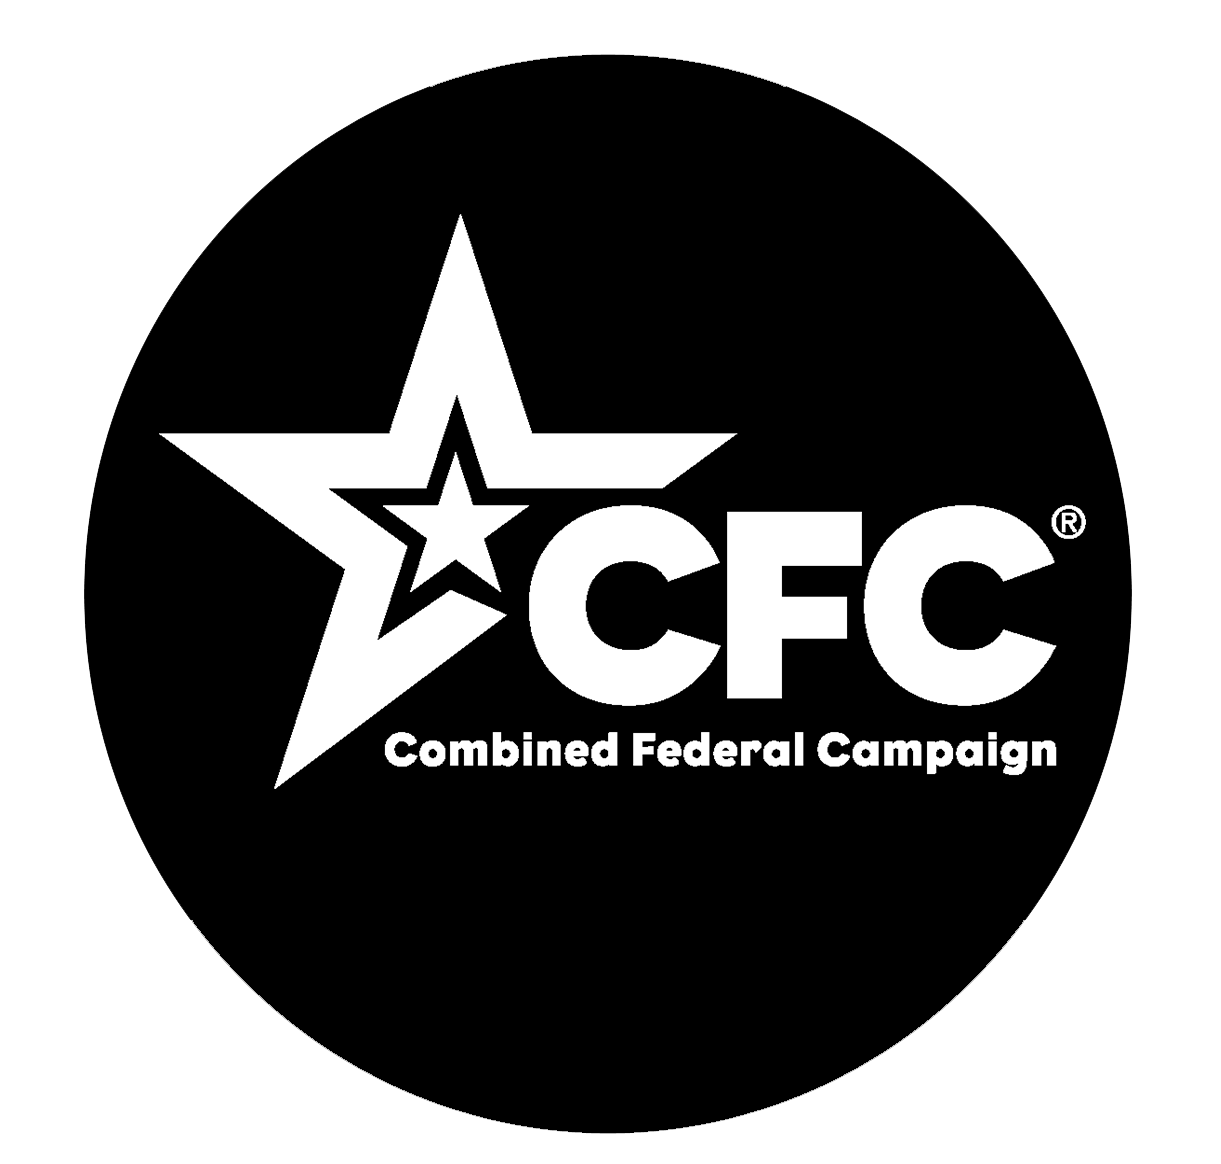 Button image - combined federal campaign, CFC